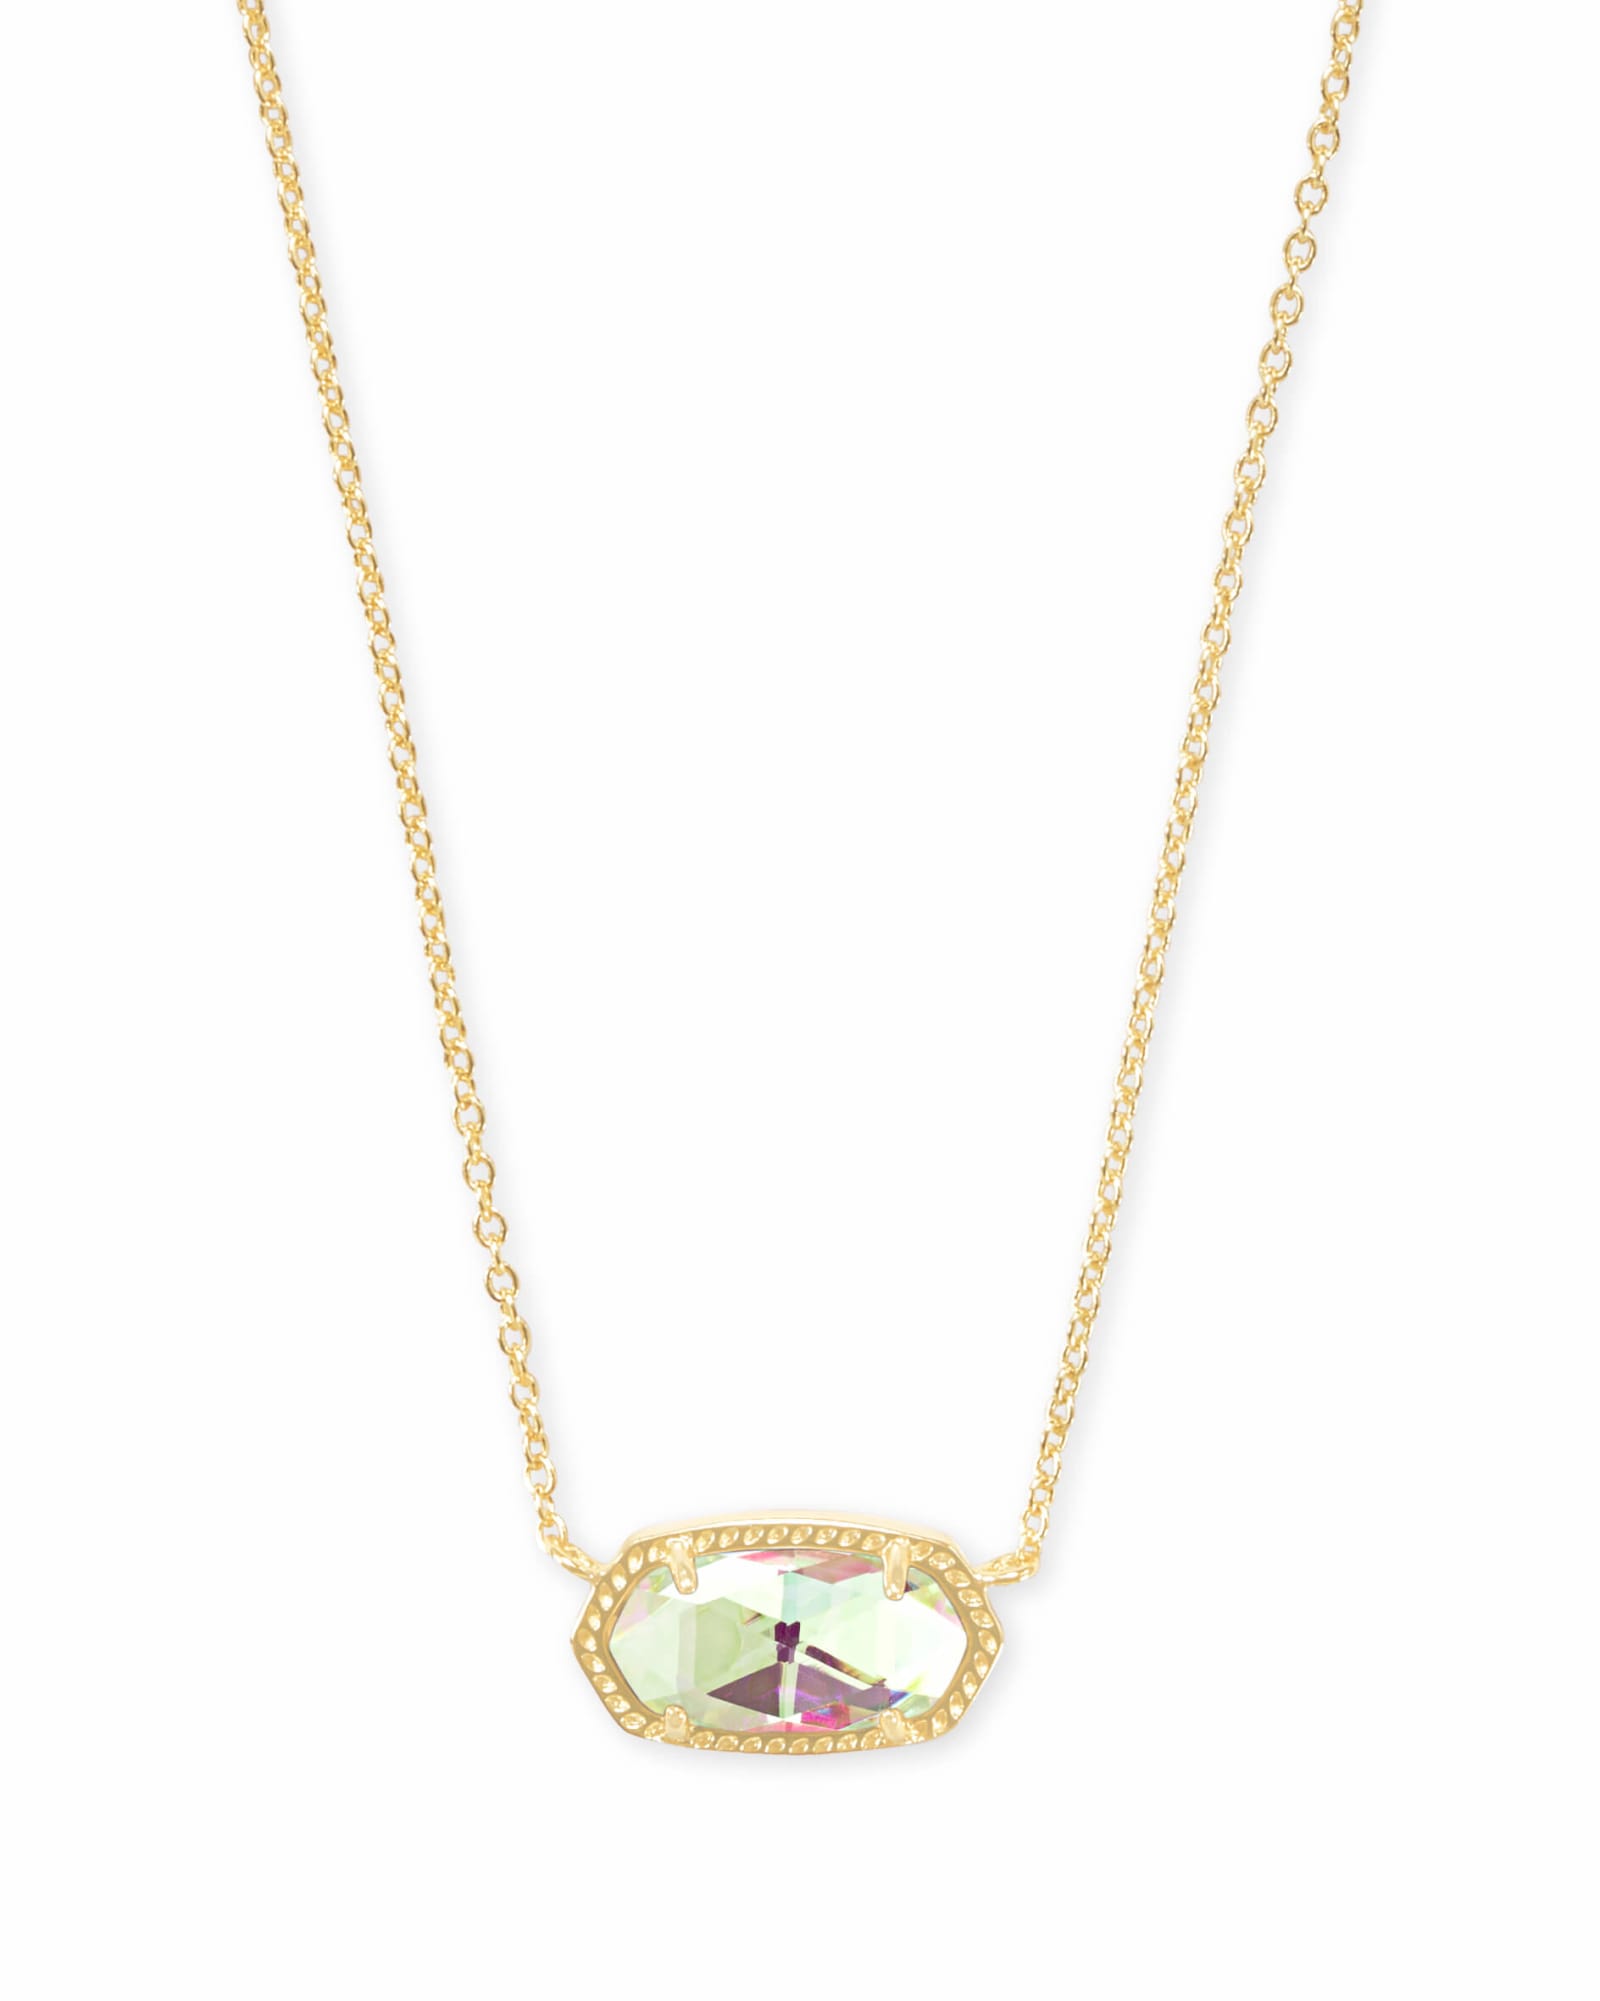 Kendra Scott Elisa Gold Pendant Necklace in Dichroic | Glass